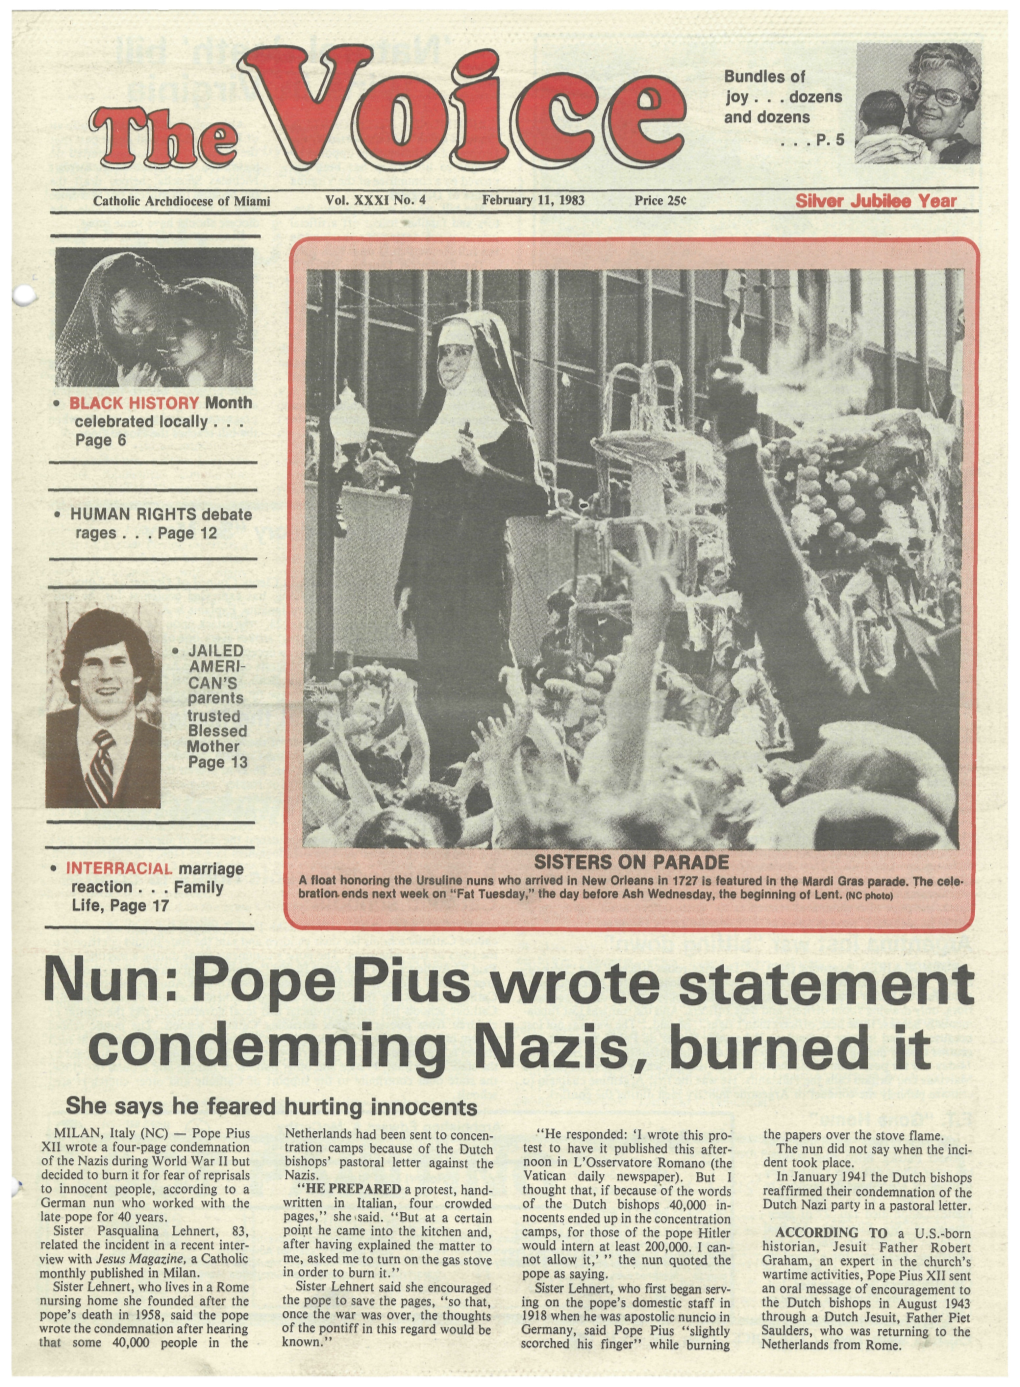 Nun: Pope Pius Wrote Statement Condemning Nazis, Burned It